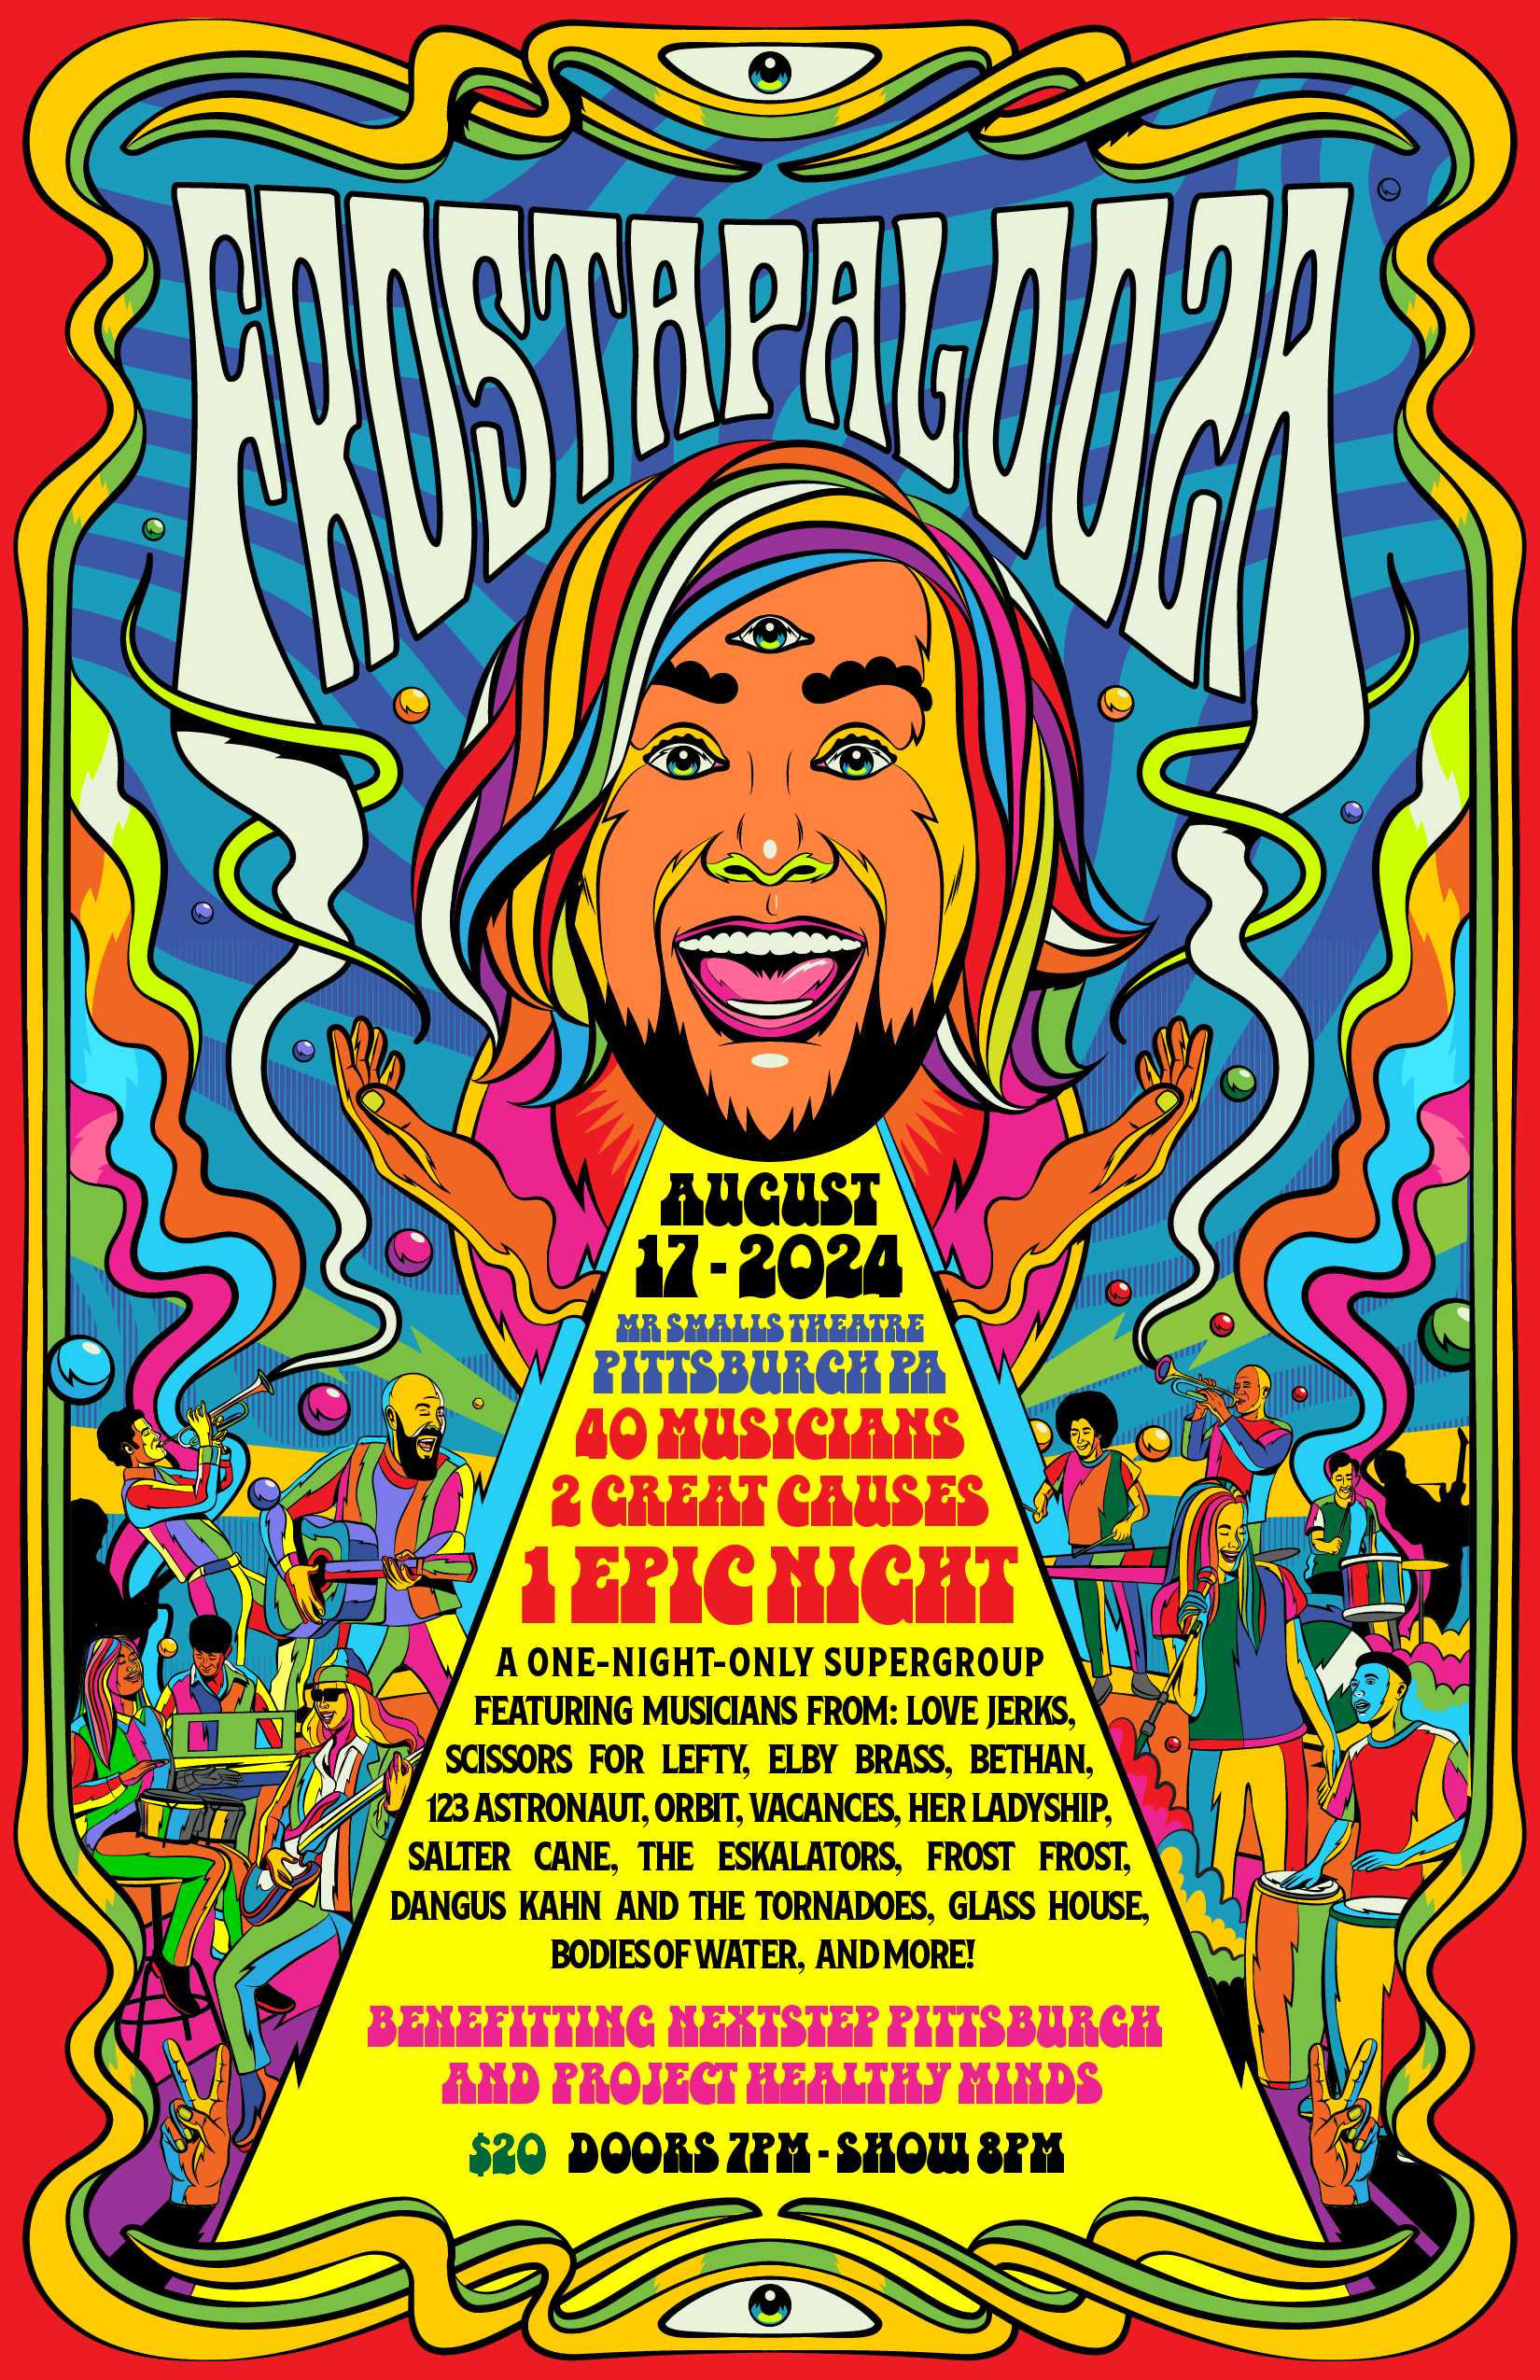 Frostapalooza music poster, featuring a psychedelic illustration of Brad's face, a bunch of musicians, and the details of the concert